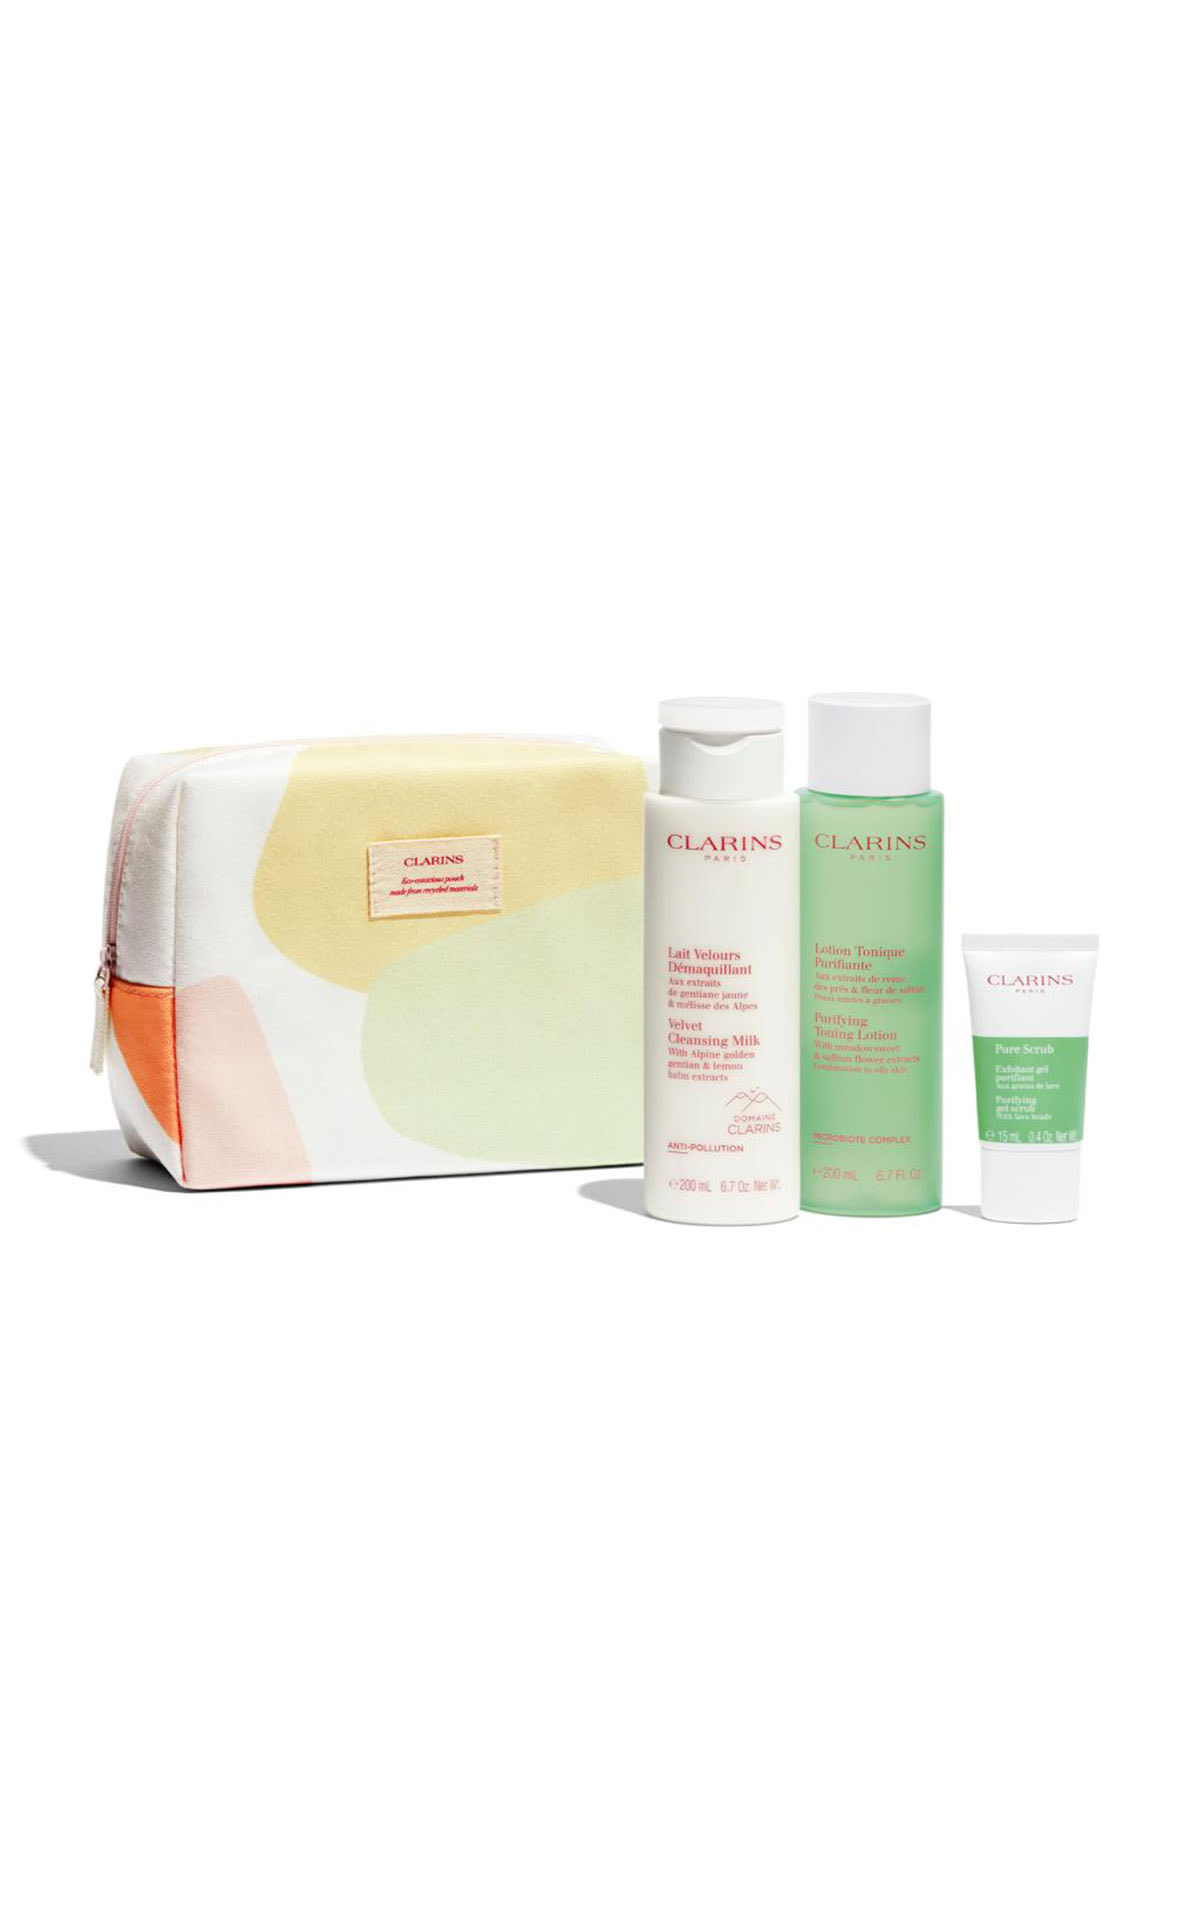 Clarins Cleansing essentials kit oily skin collection from Bicester Village